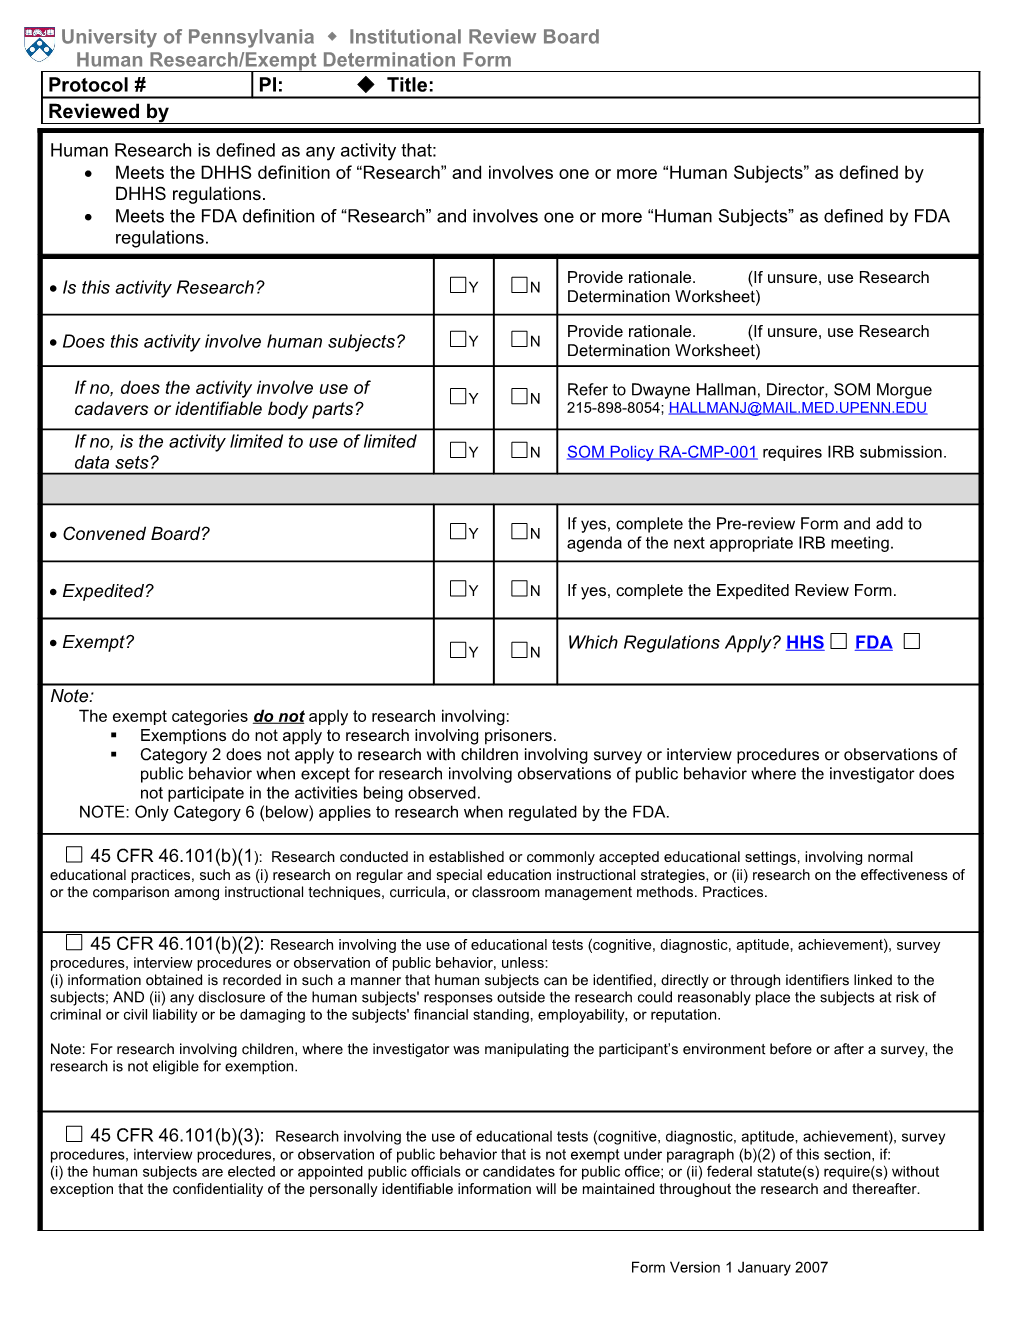 Human Research/Exempt Determination Form